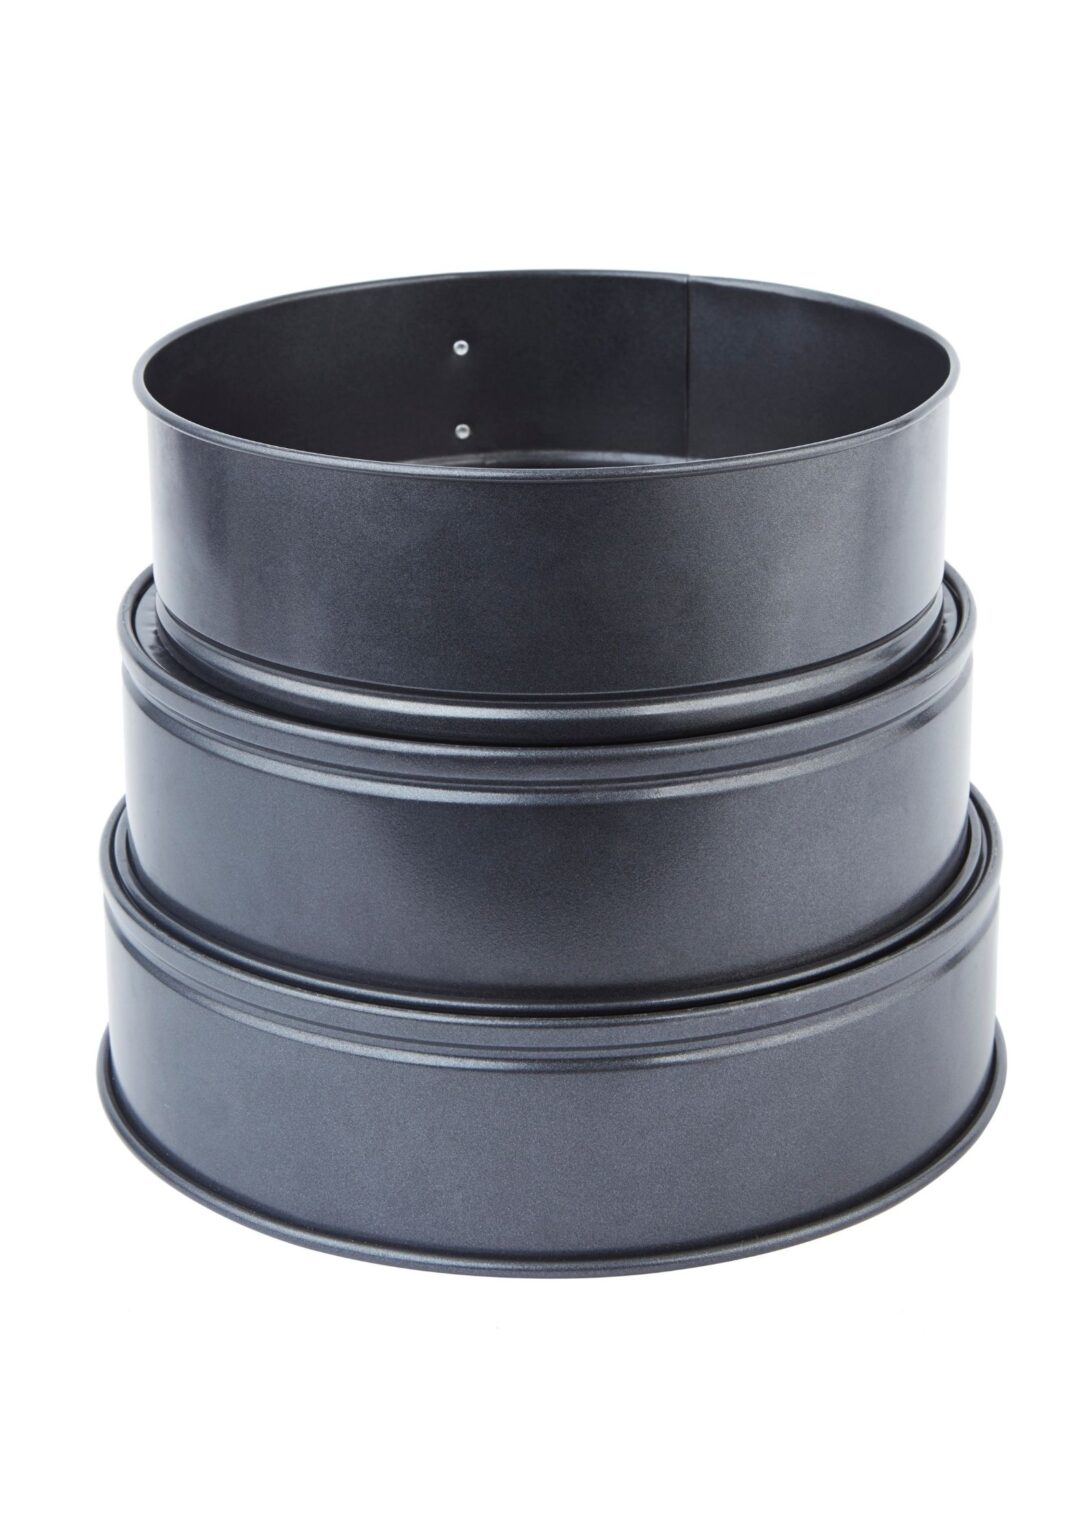 Dimensions and volume Bakeware